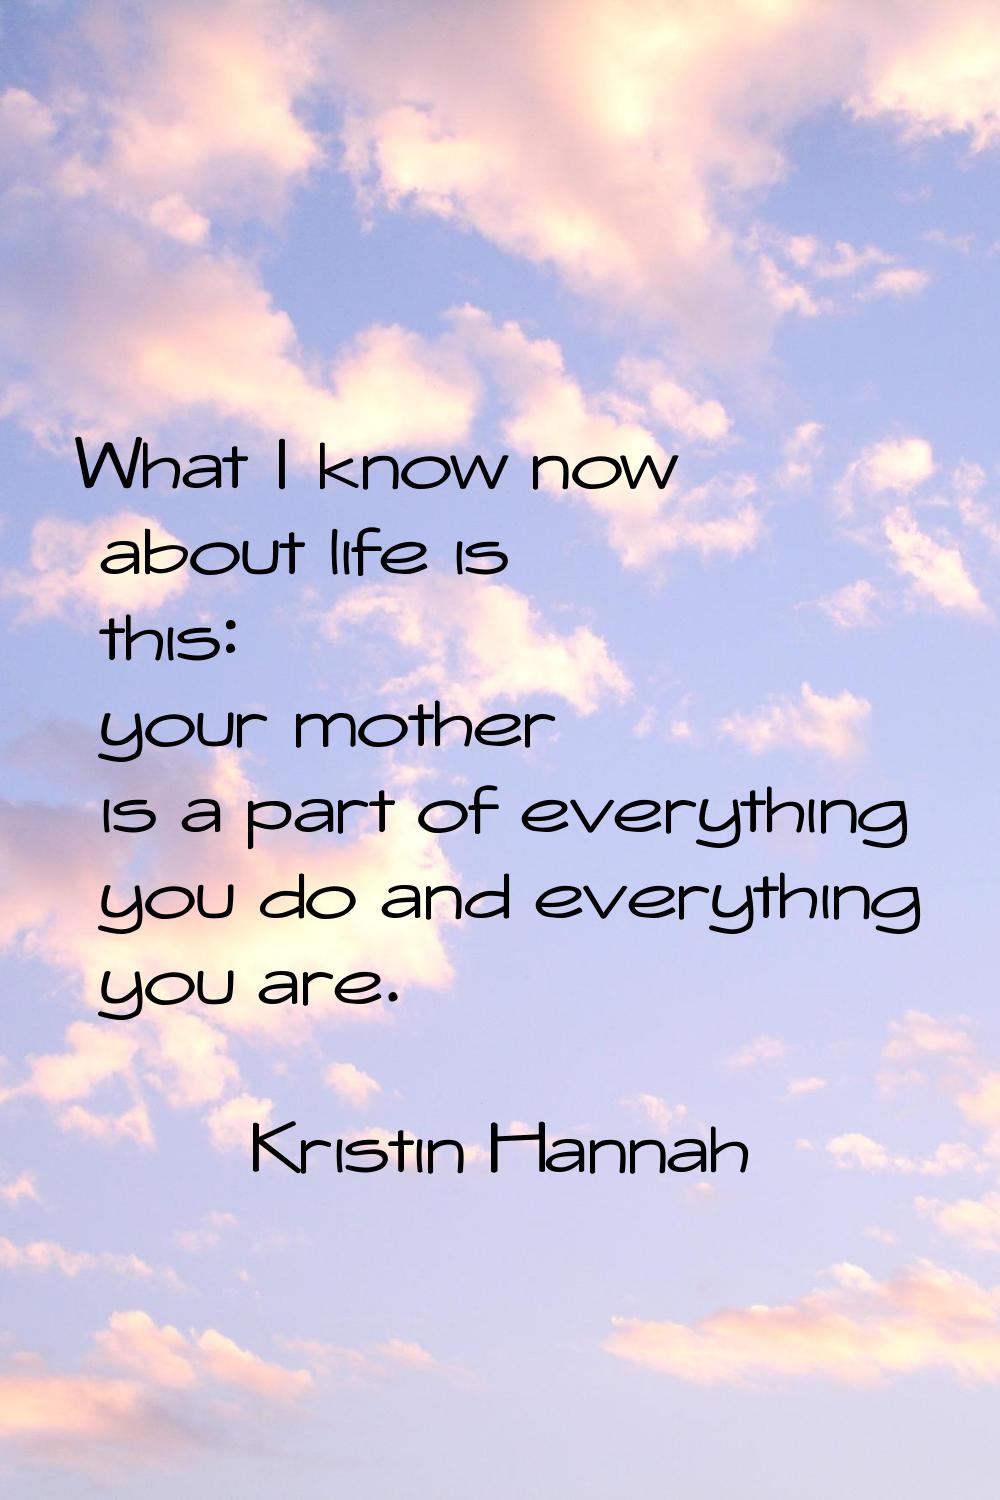 What I know now about life is this: your mother is a part of everything you do and everything you a